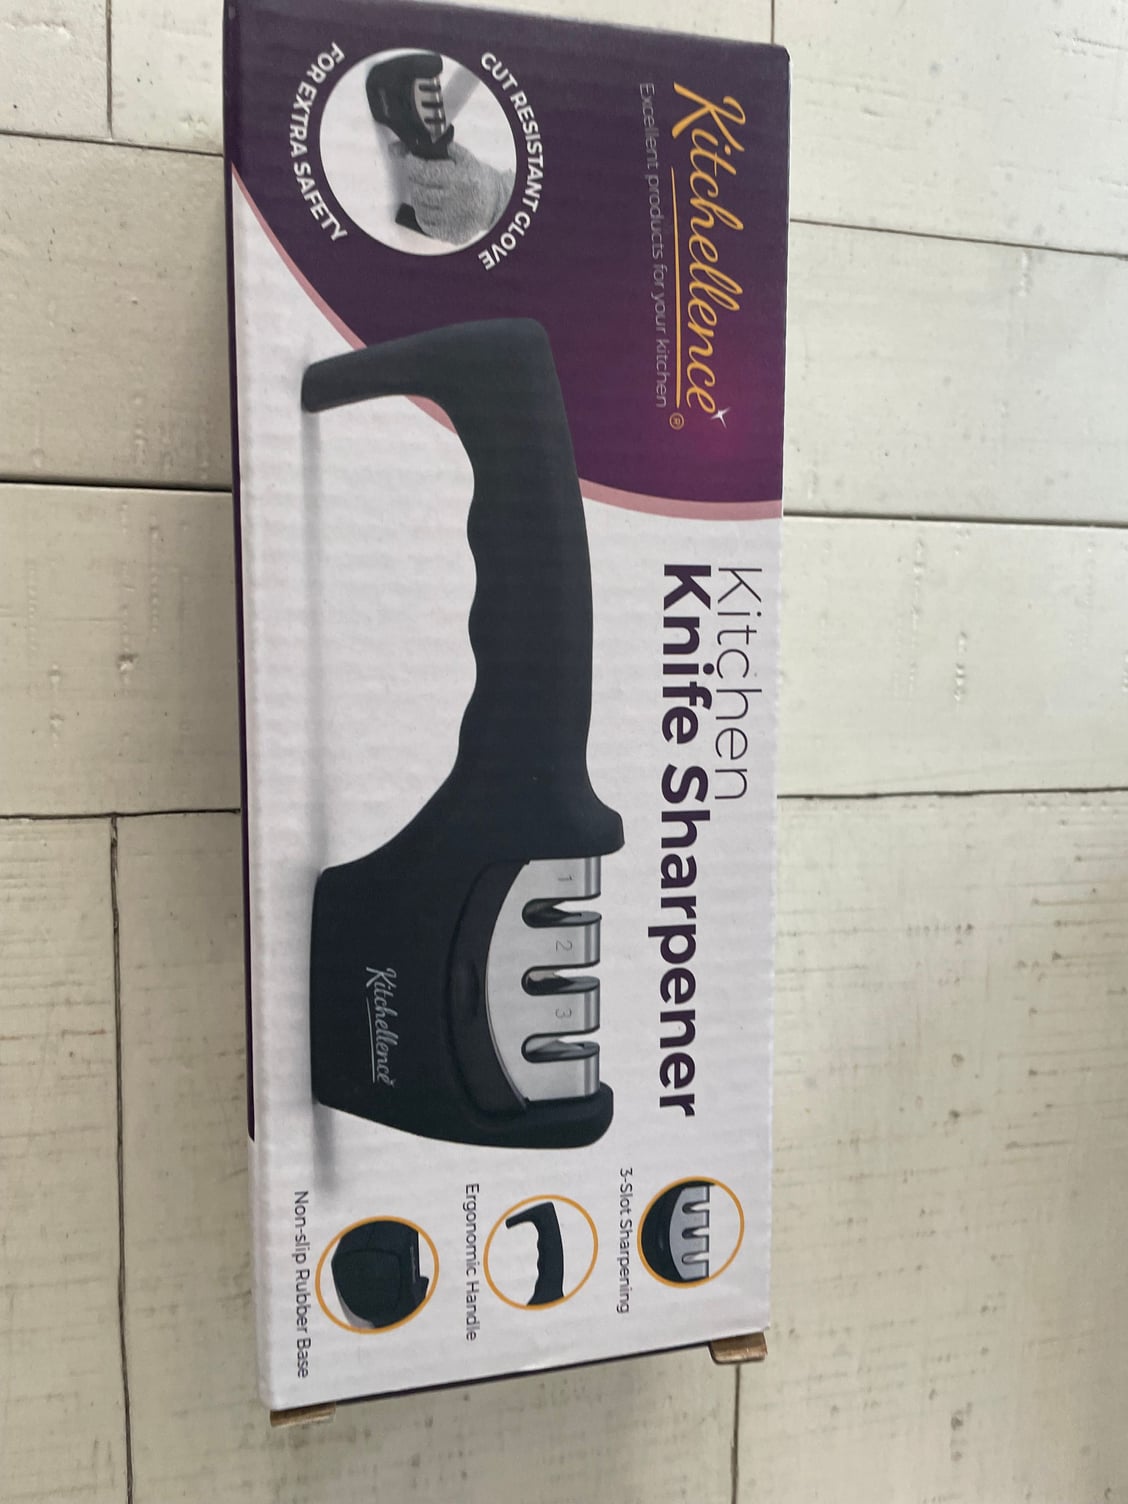 Kitchellence 3 Stage Knife Sharpener - Brand new - The Hull Truth - Boating  and Fishing Forum